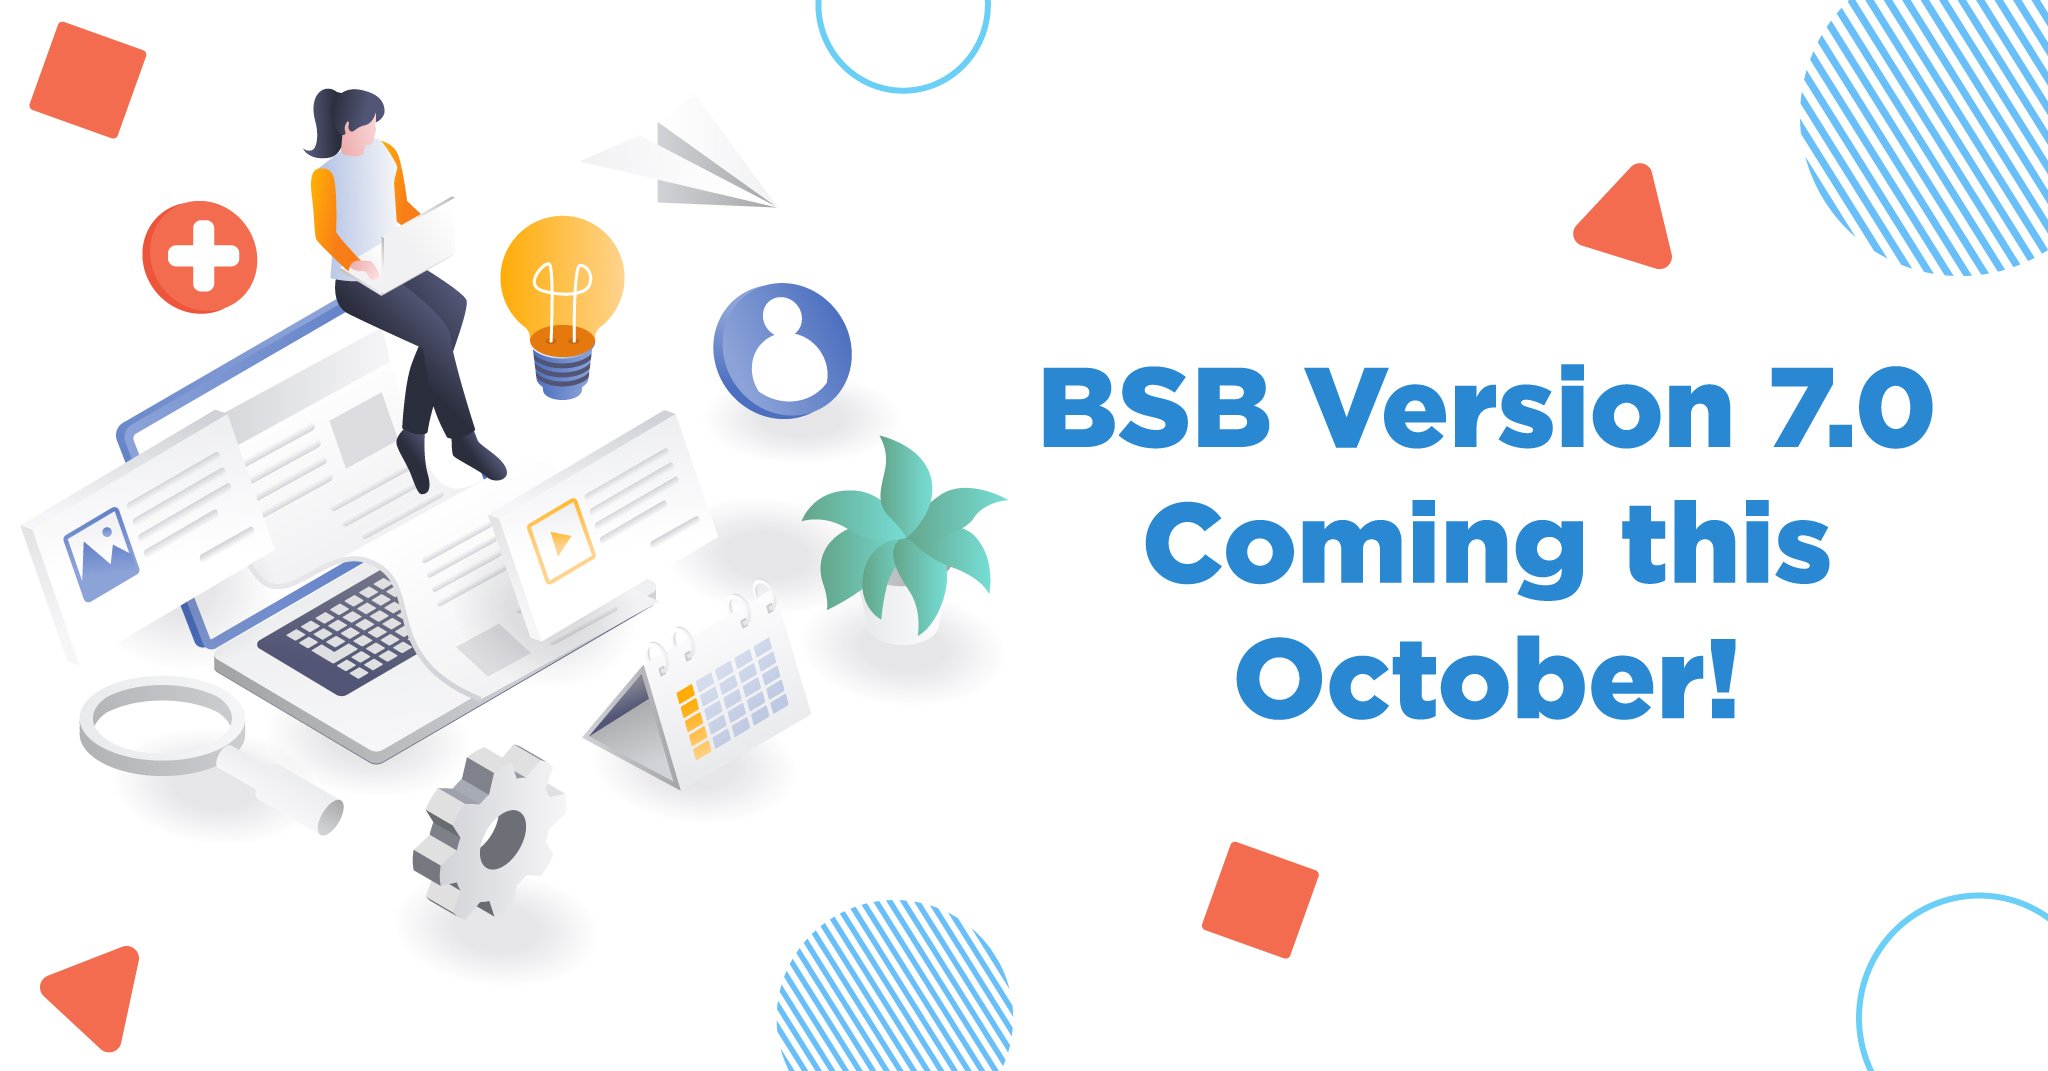 BSB Version 7.0 coming this October